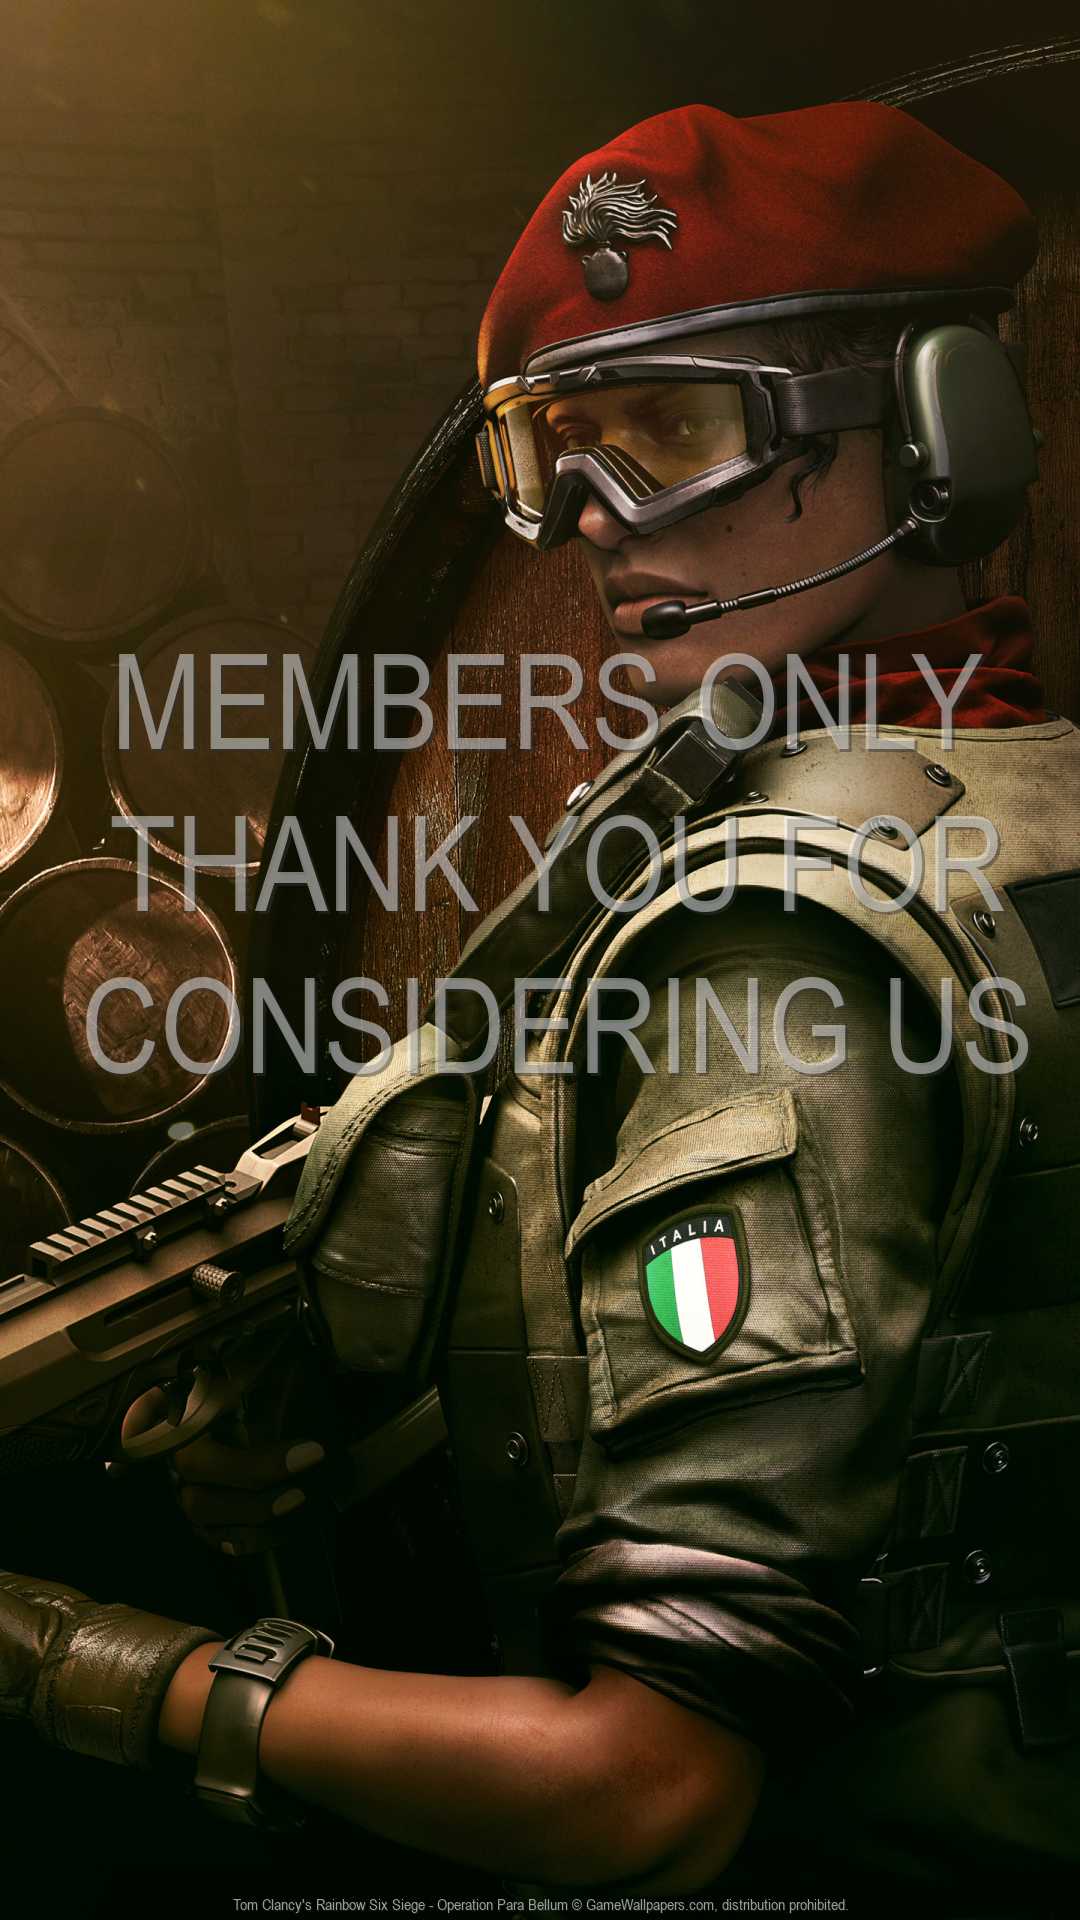 Tom Clancy's Rainbow Six: Siege - Operation Para Bellum 1080p Vertical Mobile wallpaper or background 02